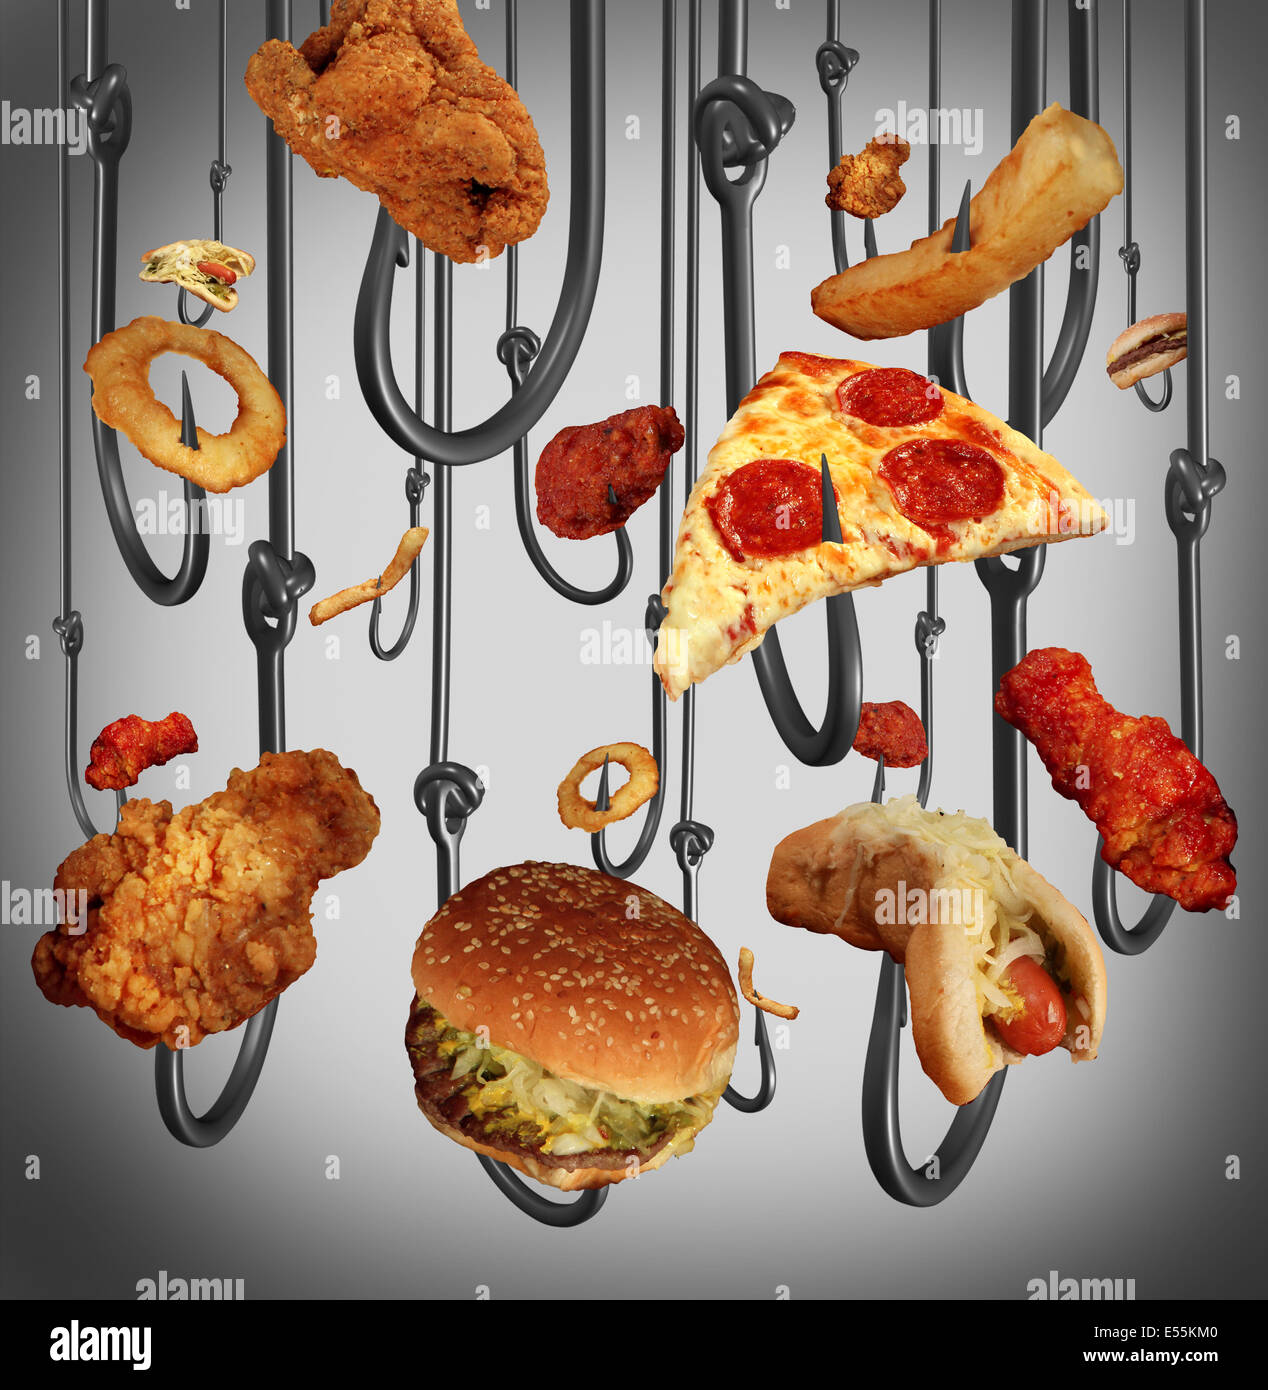 Eating addiction health care concept with a group of metal fish hooks using fast food as human bait as fried chicken hamburgers Stock Photo